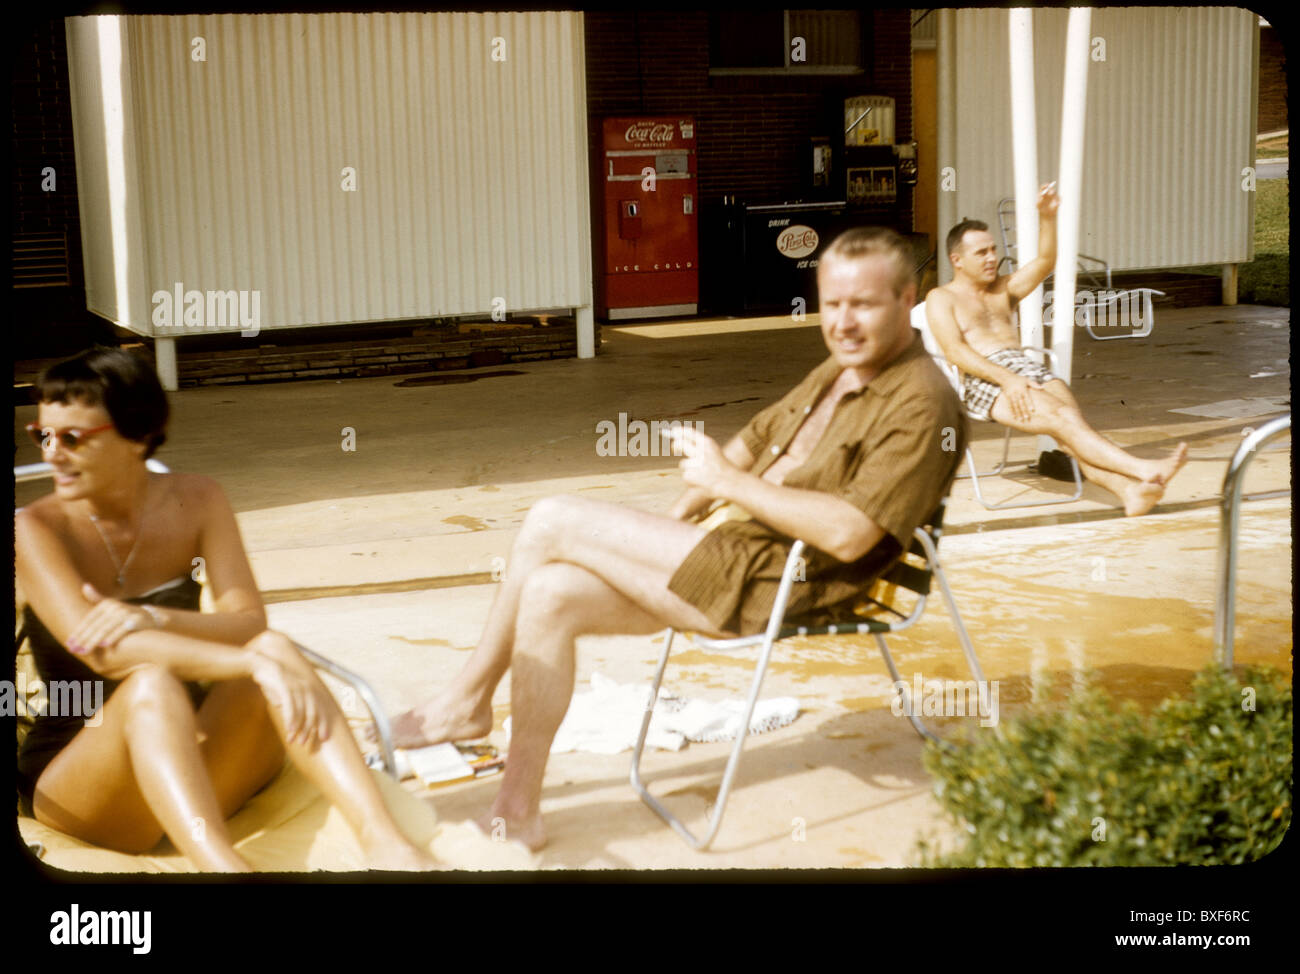 two men and one woman relaxing poolside swimming pool motel coca cola machine 1959 1950s outdoors vacation travel summer black Stock Photo